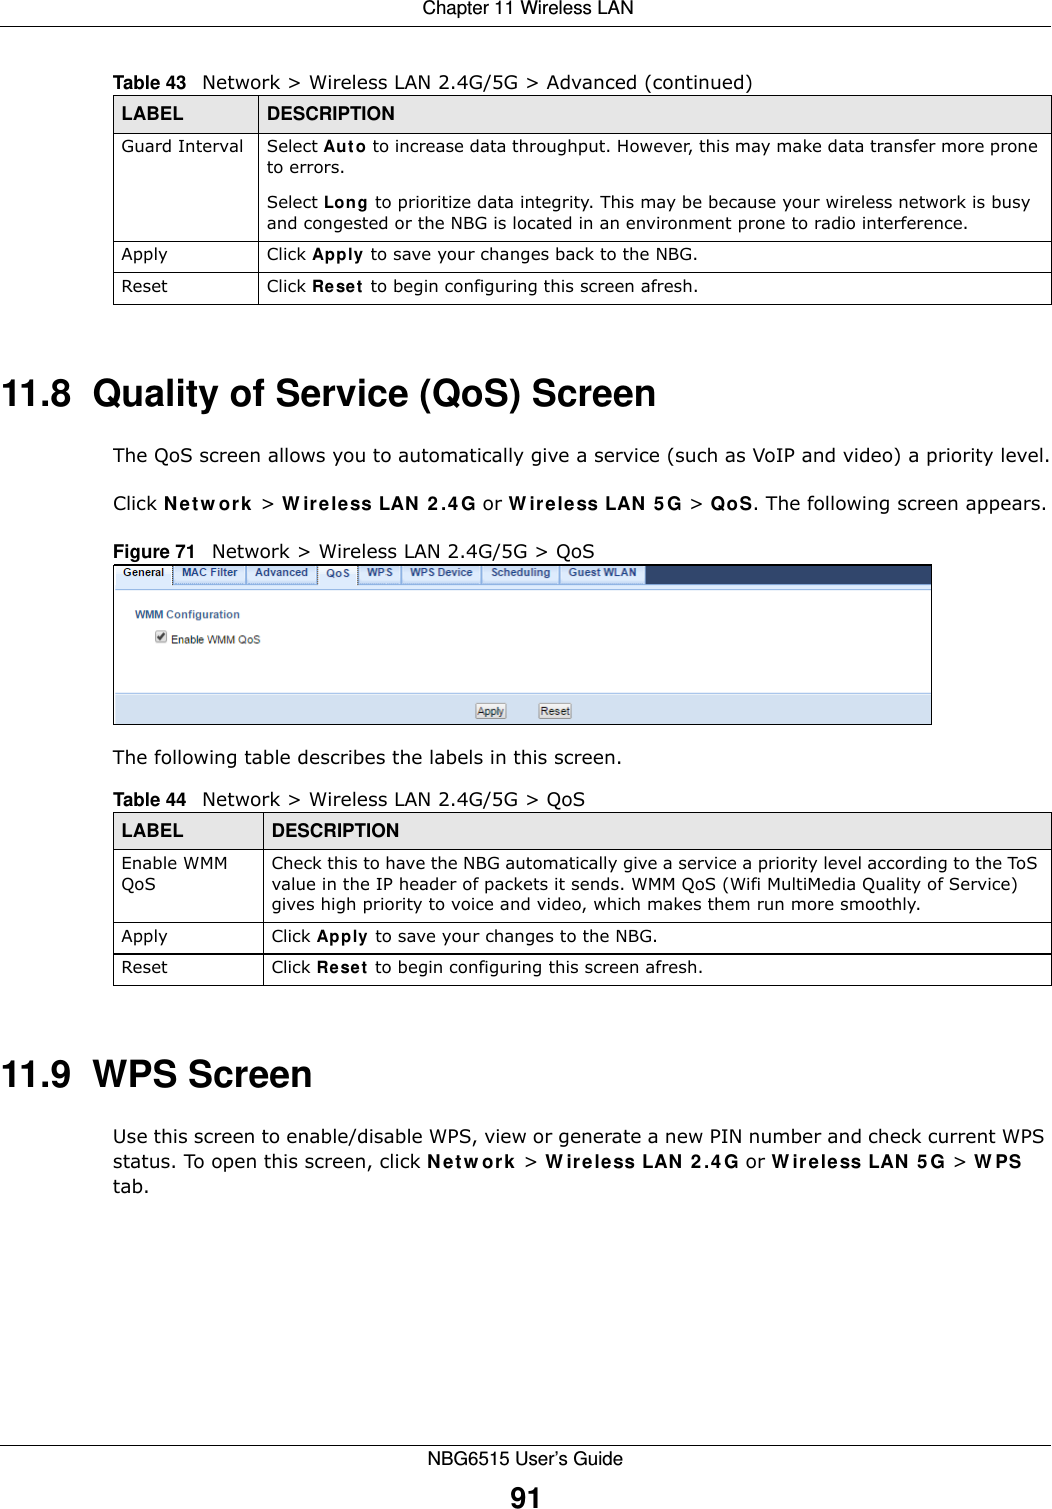  Chapter 11 Wireless LANNBG6515 User’s Guide9111.8  Quality of Service (QoS) ScreenThe QoS screen allows you to automatically give a service (such as VoIP and video) a priority level.Click Network &gt; Wireless LAN 2.4G or Wireless LAN 5G &gt; QoS. The following screen appears.Figure 71   Network &gt; Wireless LAN 2.4G/5G &gt; QoS The following table describes the labels in this screen. 11.9  WPS ScreenUse this screen to enable/disable WPS, view or generate a new PIN number and check current WPS status. To open this screen, click Network &gt; Wireless LAN 2.4G or Wireless LAN 5G &gt; WPS tab.Guard Interval Select Auto to increase data throughput. However, this may make data transfer more prone to errors.Select Long to prioritize data integrity. This may be because your wireless network is busy and congested or the NBG is located in an environment prone to radio interference.Apply Click Apply to save your changes back to the NBG.Reset Click Reset to begin configuring this screen afresh.Table 43   Network &gt; Wireless LAN 2.4G/5G &gt; Advanced (continued)LABEL DESCRIPTIONTable 44   Network &gt; Wireless LAN 2.4G/5G &gt; QoSLABEL DESCRIPTIONEnable WMM QoSCheck this to have the NBG automatically give a service a priority level according to the ToS value in the IP header of packets it sends. WMM QoS (Wifi MultiMedia Quality of Service) gives high priority to voice and video, which makes them run more smoothly.Apply Click Apply to save your changes to the NBG.Reset Click Reset to begin configuring this screen afresh.